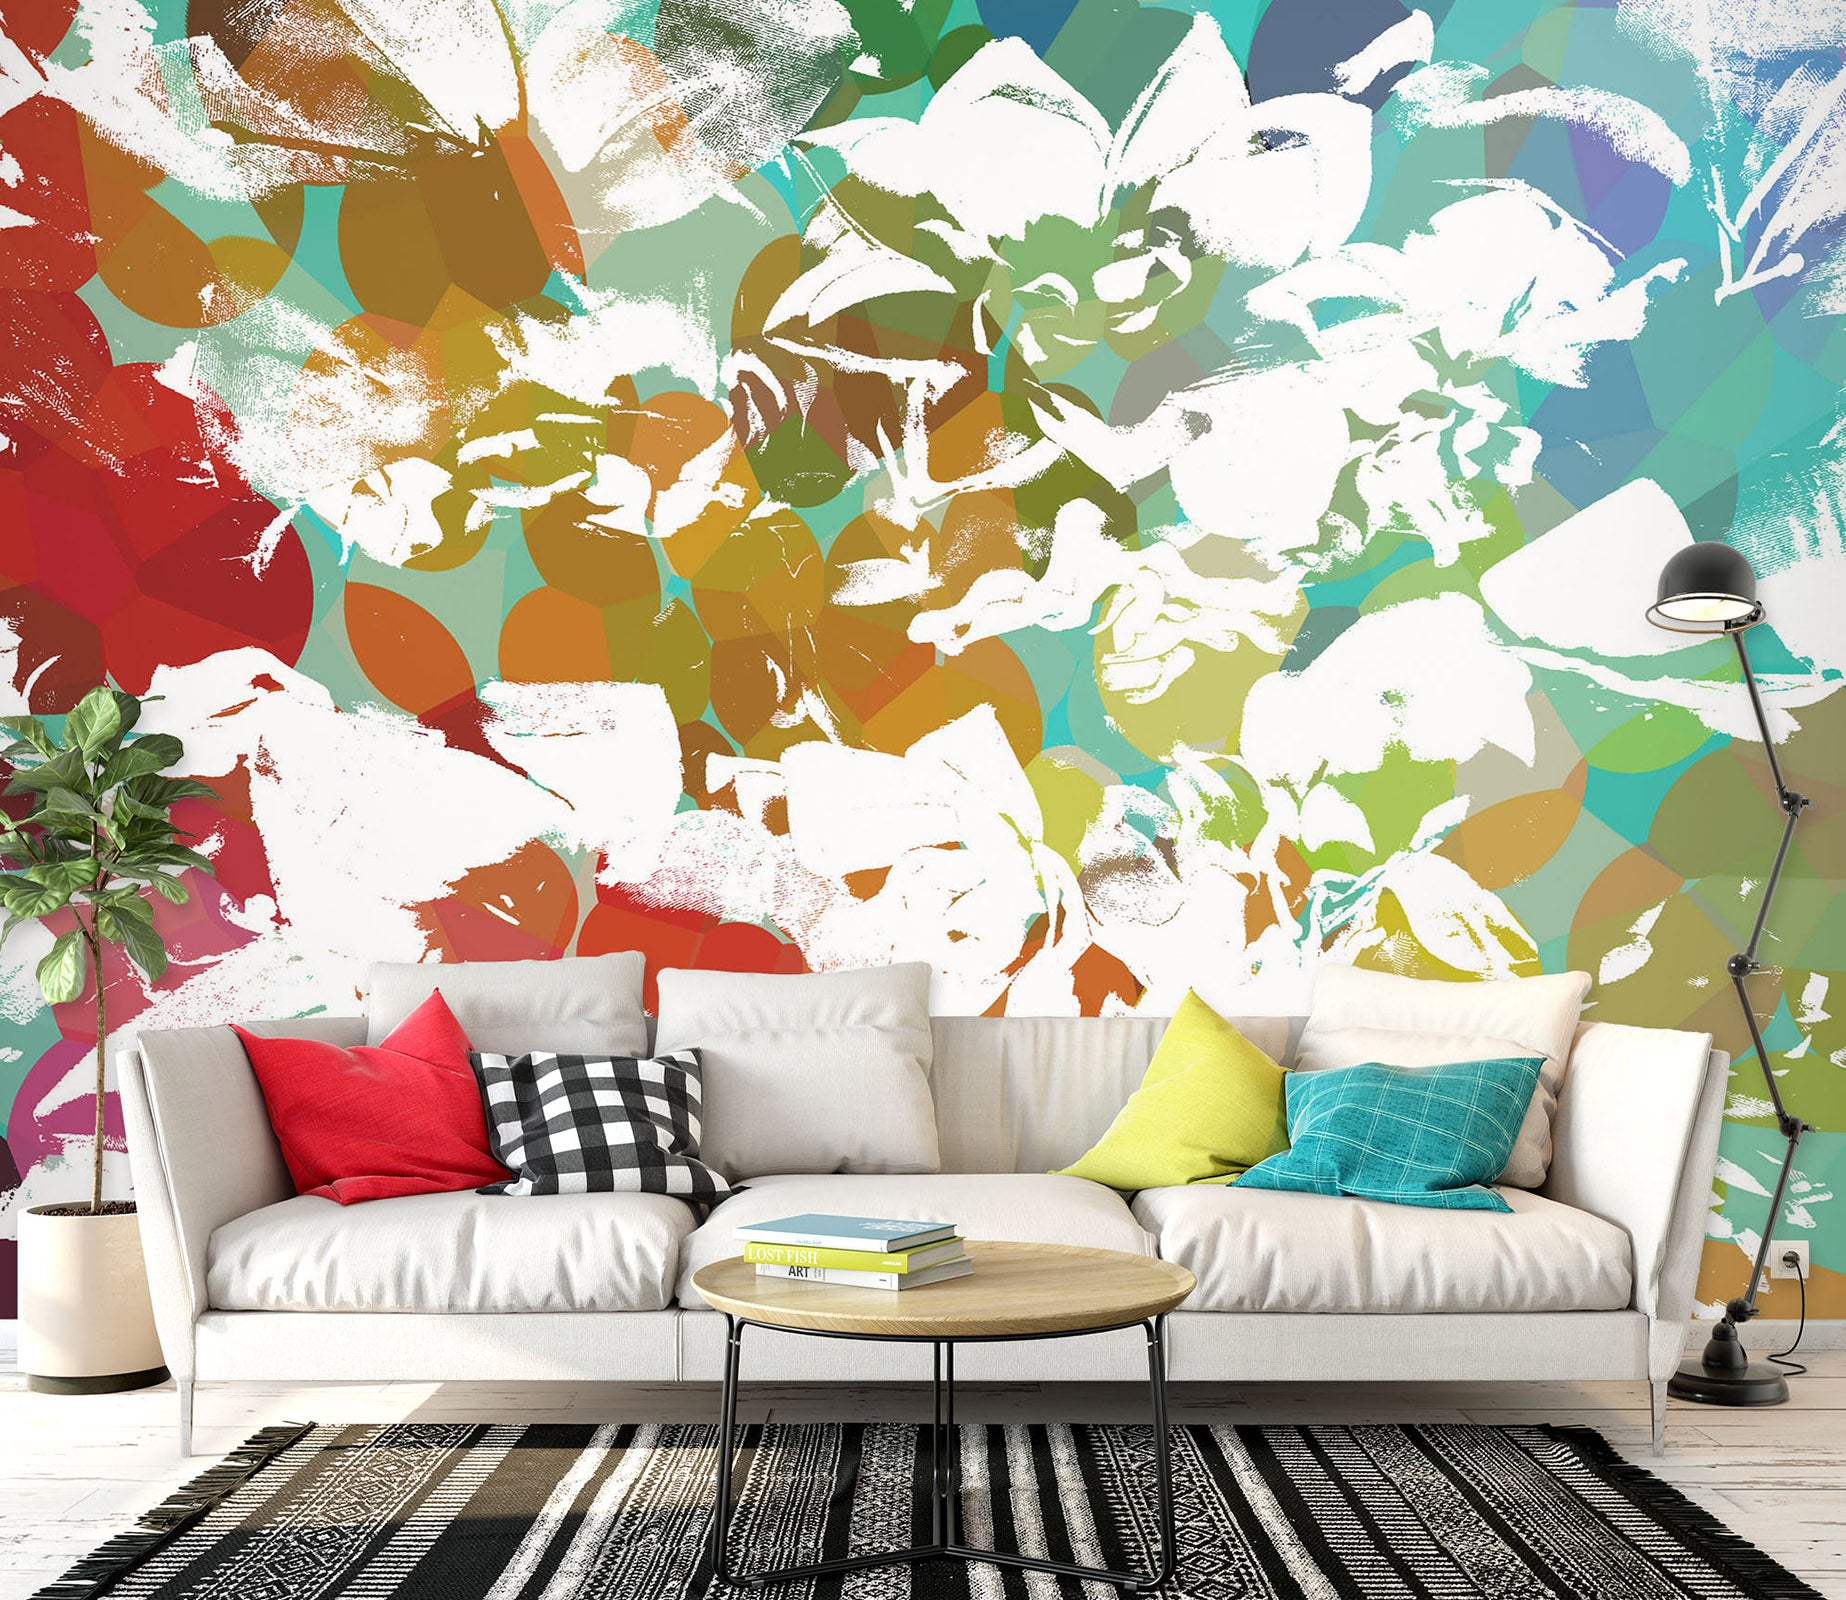 3D Color Pattern 19101 Shandra Smith Wall Mural Wall Murals